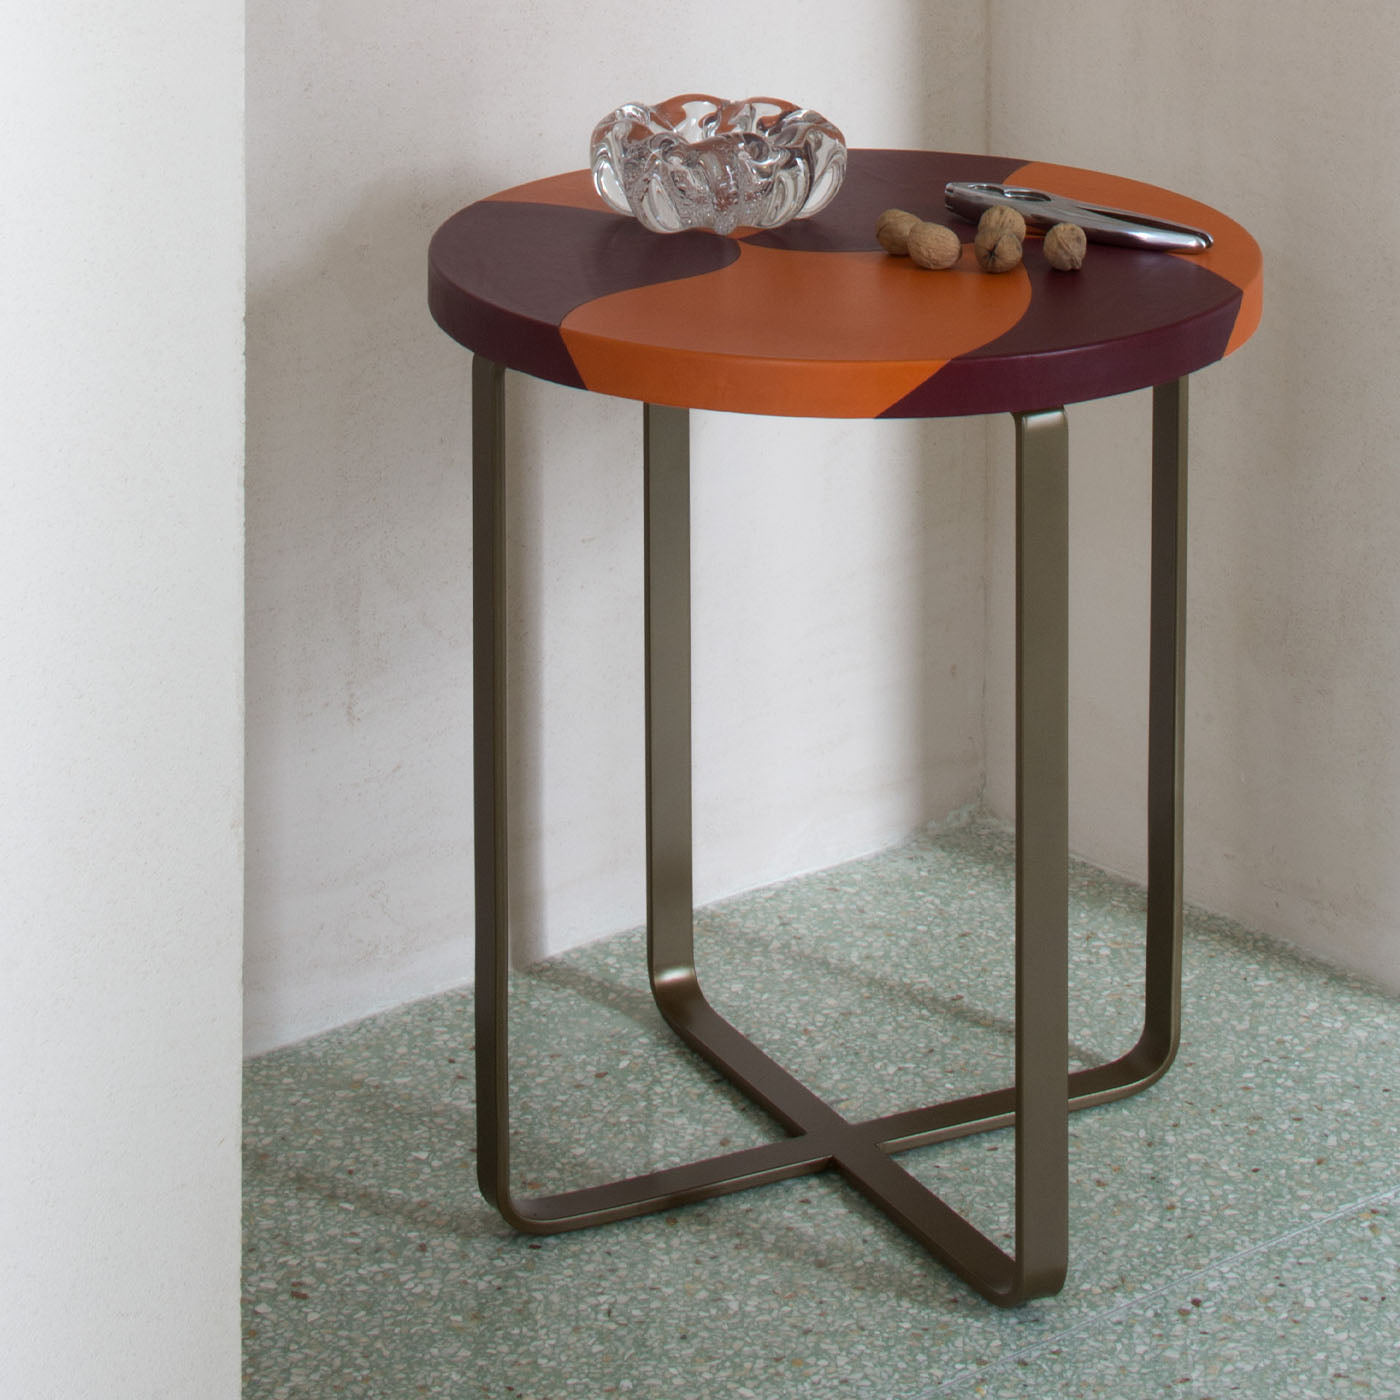 Isole Tigre Round Polychrome Side Table by Nestor Perkal - Alternative view 4